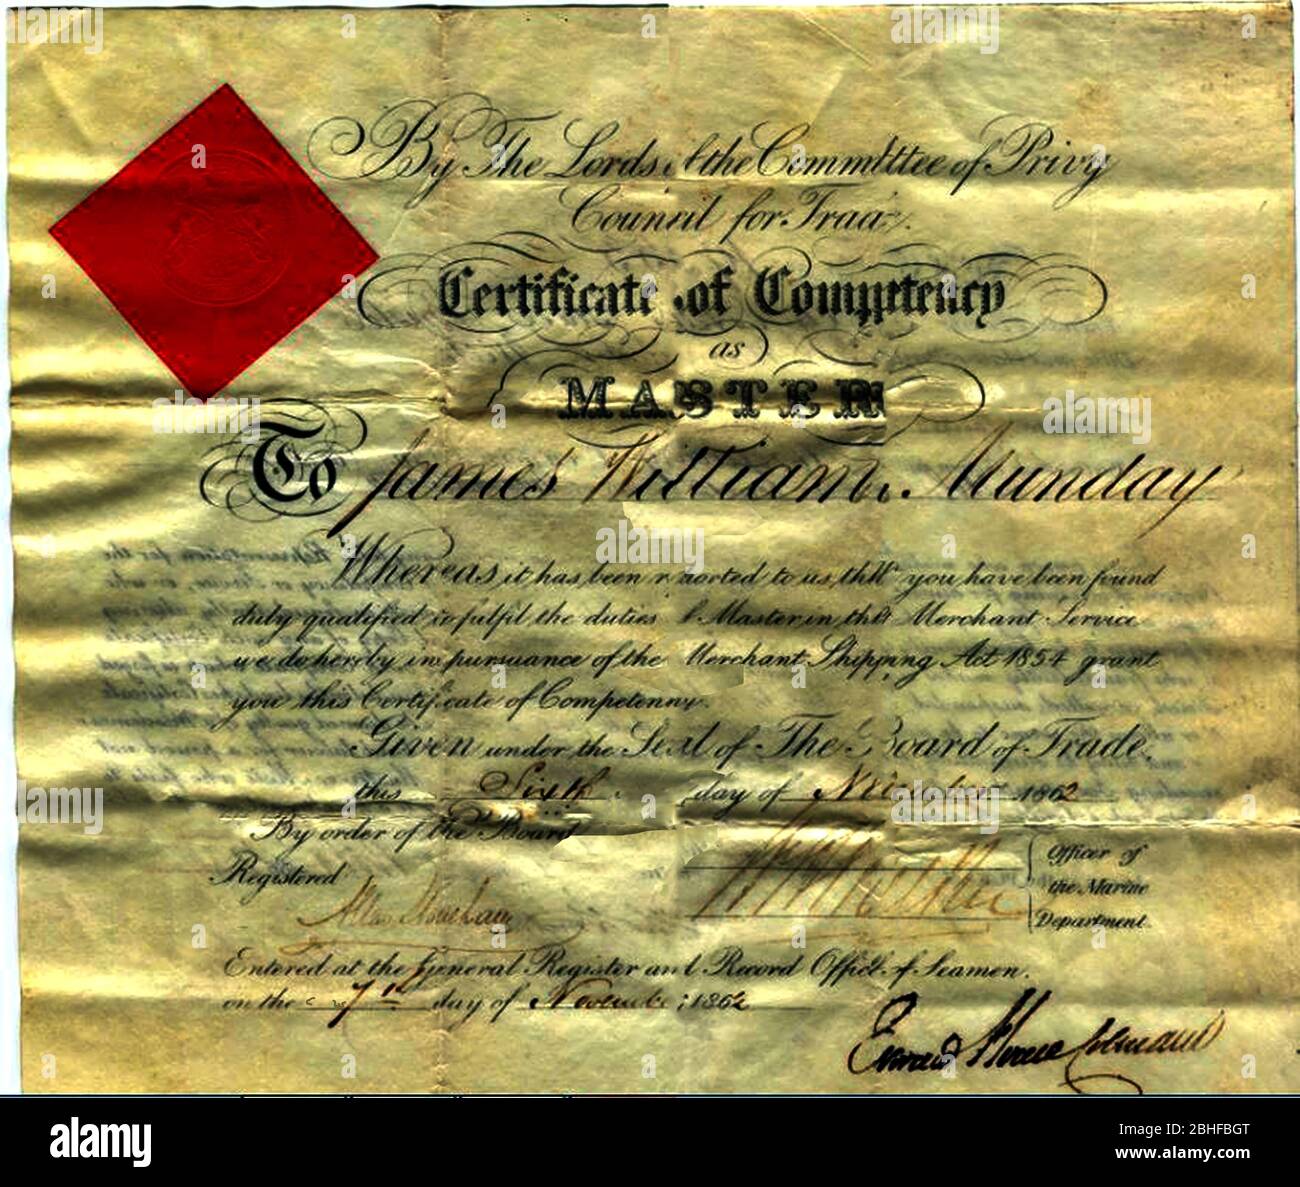 A Captain's / Master's certificate of competence issued in 1862 under the British Merchant Shipping Act of 1854 (given under the seal of the Board of Trade.In the British Merchant Navy a master mariner who has sailed in command of an ocean-going merchant ship will be titled captain. A professional seafarer who holds a restricted or limited master's certificate but who has sailed in command of a ship may be called captain. Stock Photo